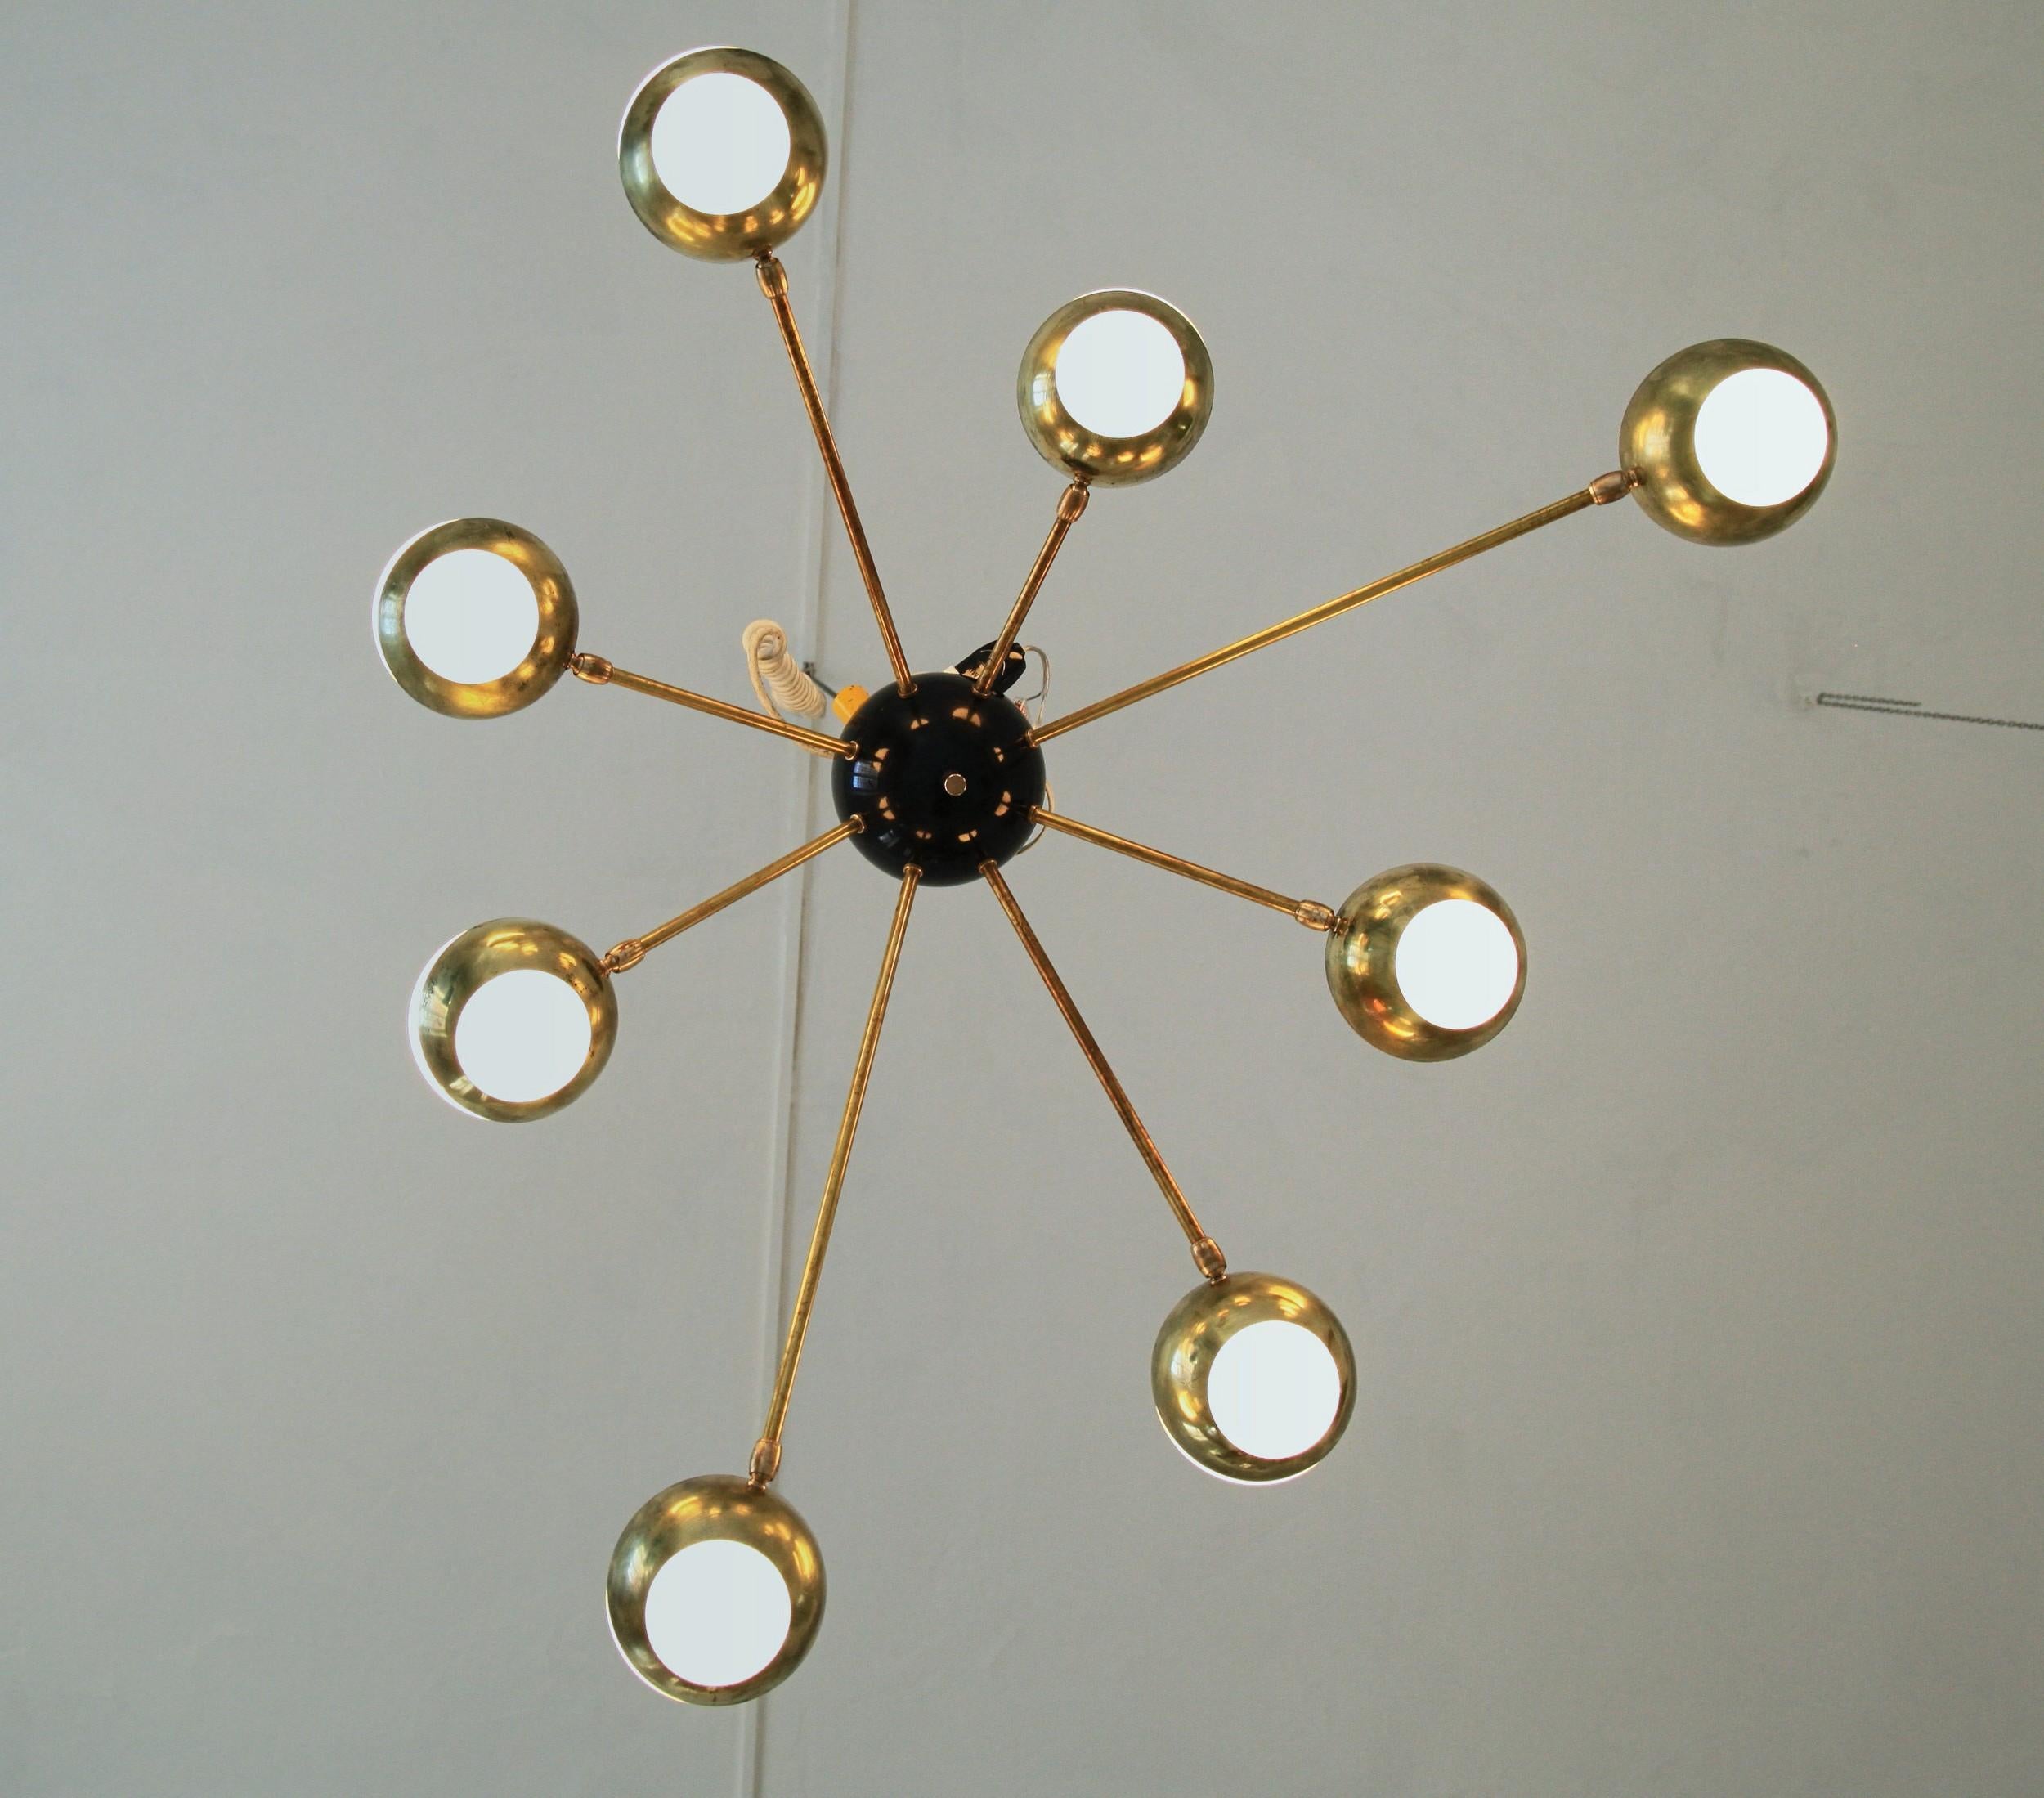 Nido, Flush Mount Brass and Glass Chandelier 8 Arms, Low Ceiling Best, Free Ship In New Condition For Sale In Tavarnelle val di Pesa, Florence